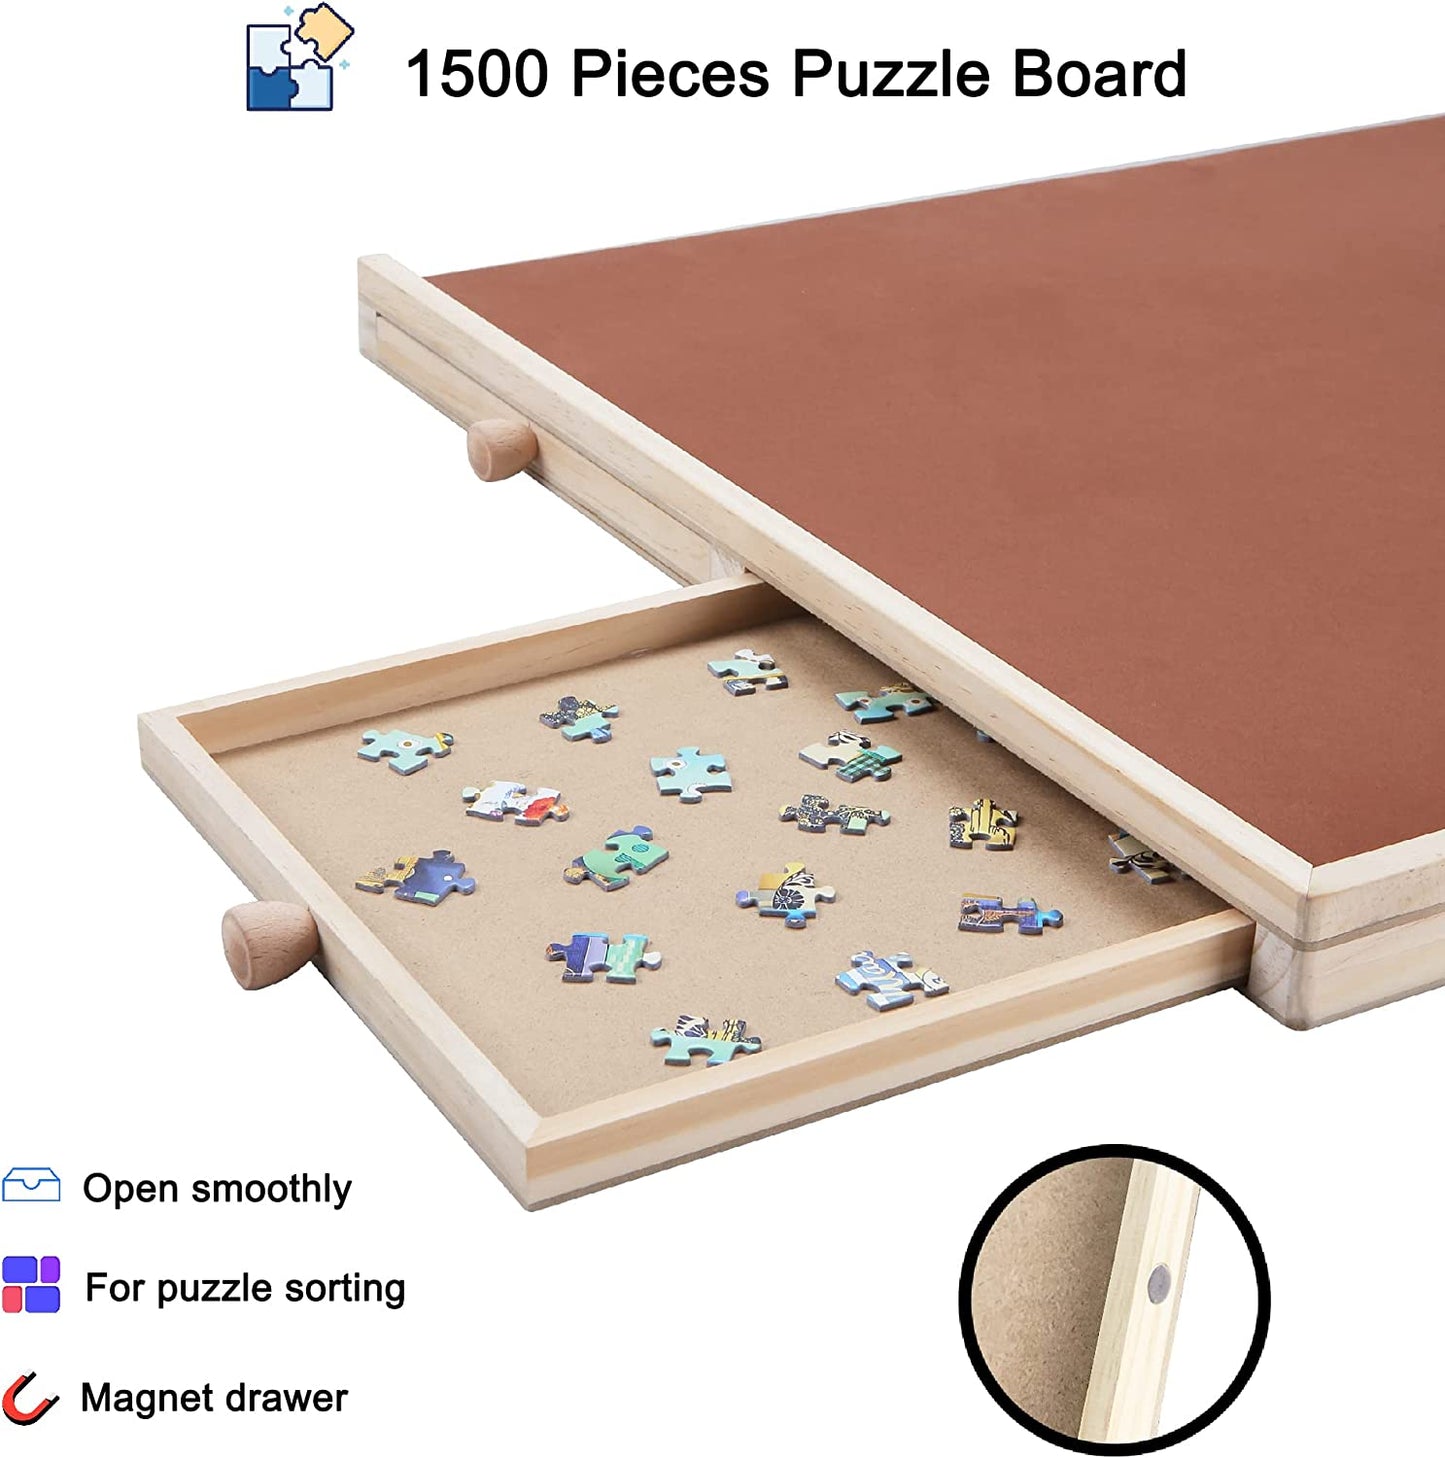 Tilted Jigsaw Puzzle Board - 1000 Pieces - Plastic Cover